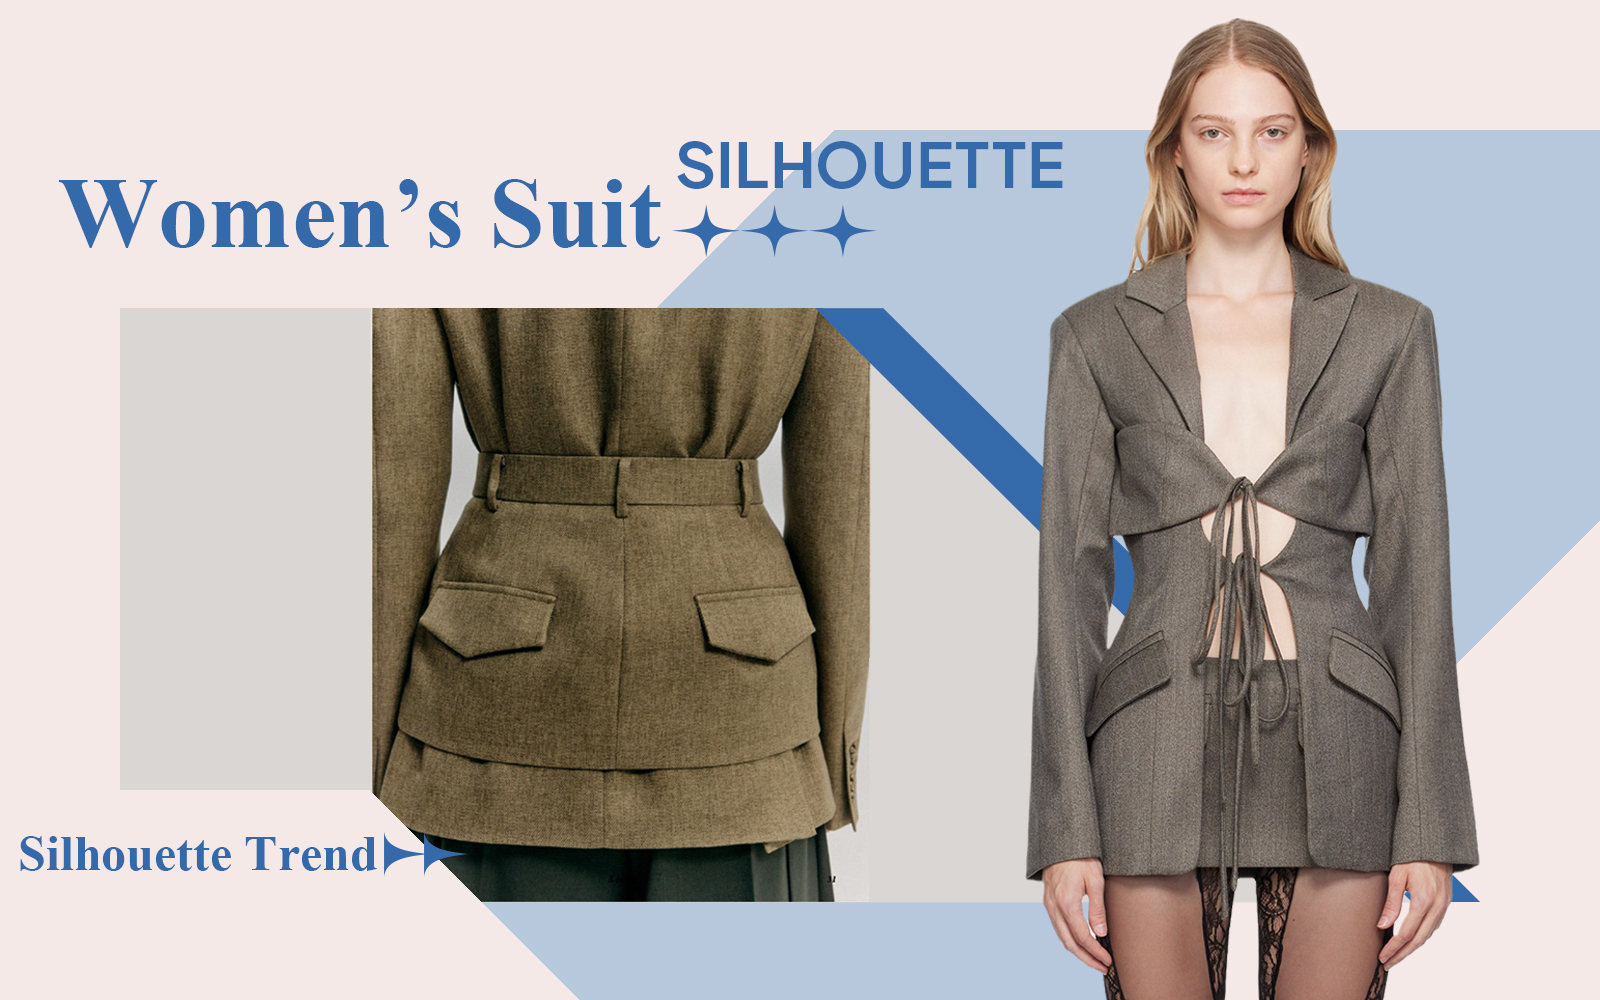 Commuting Blazer -- The Silhouette Trend for Women's Suit